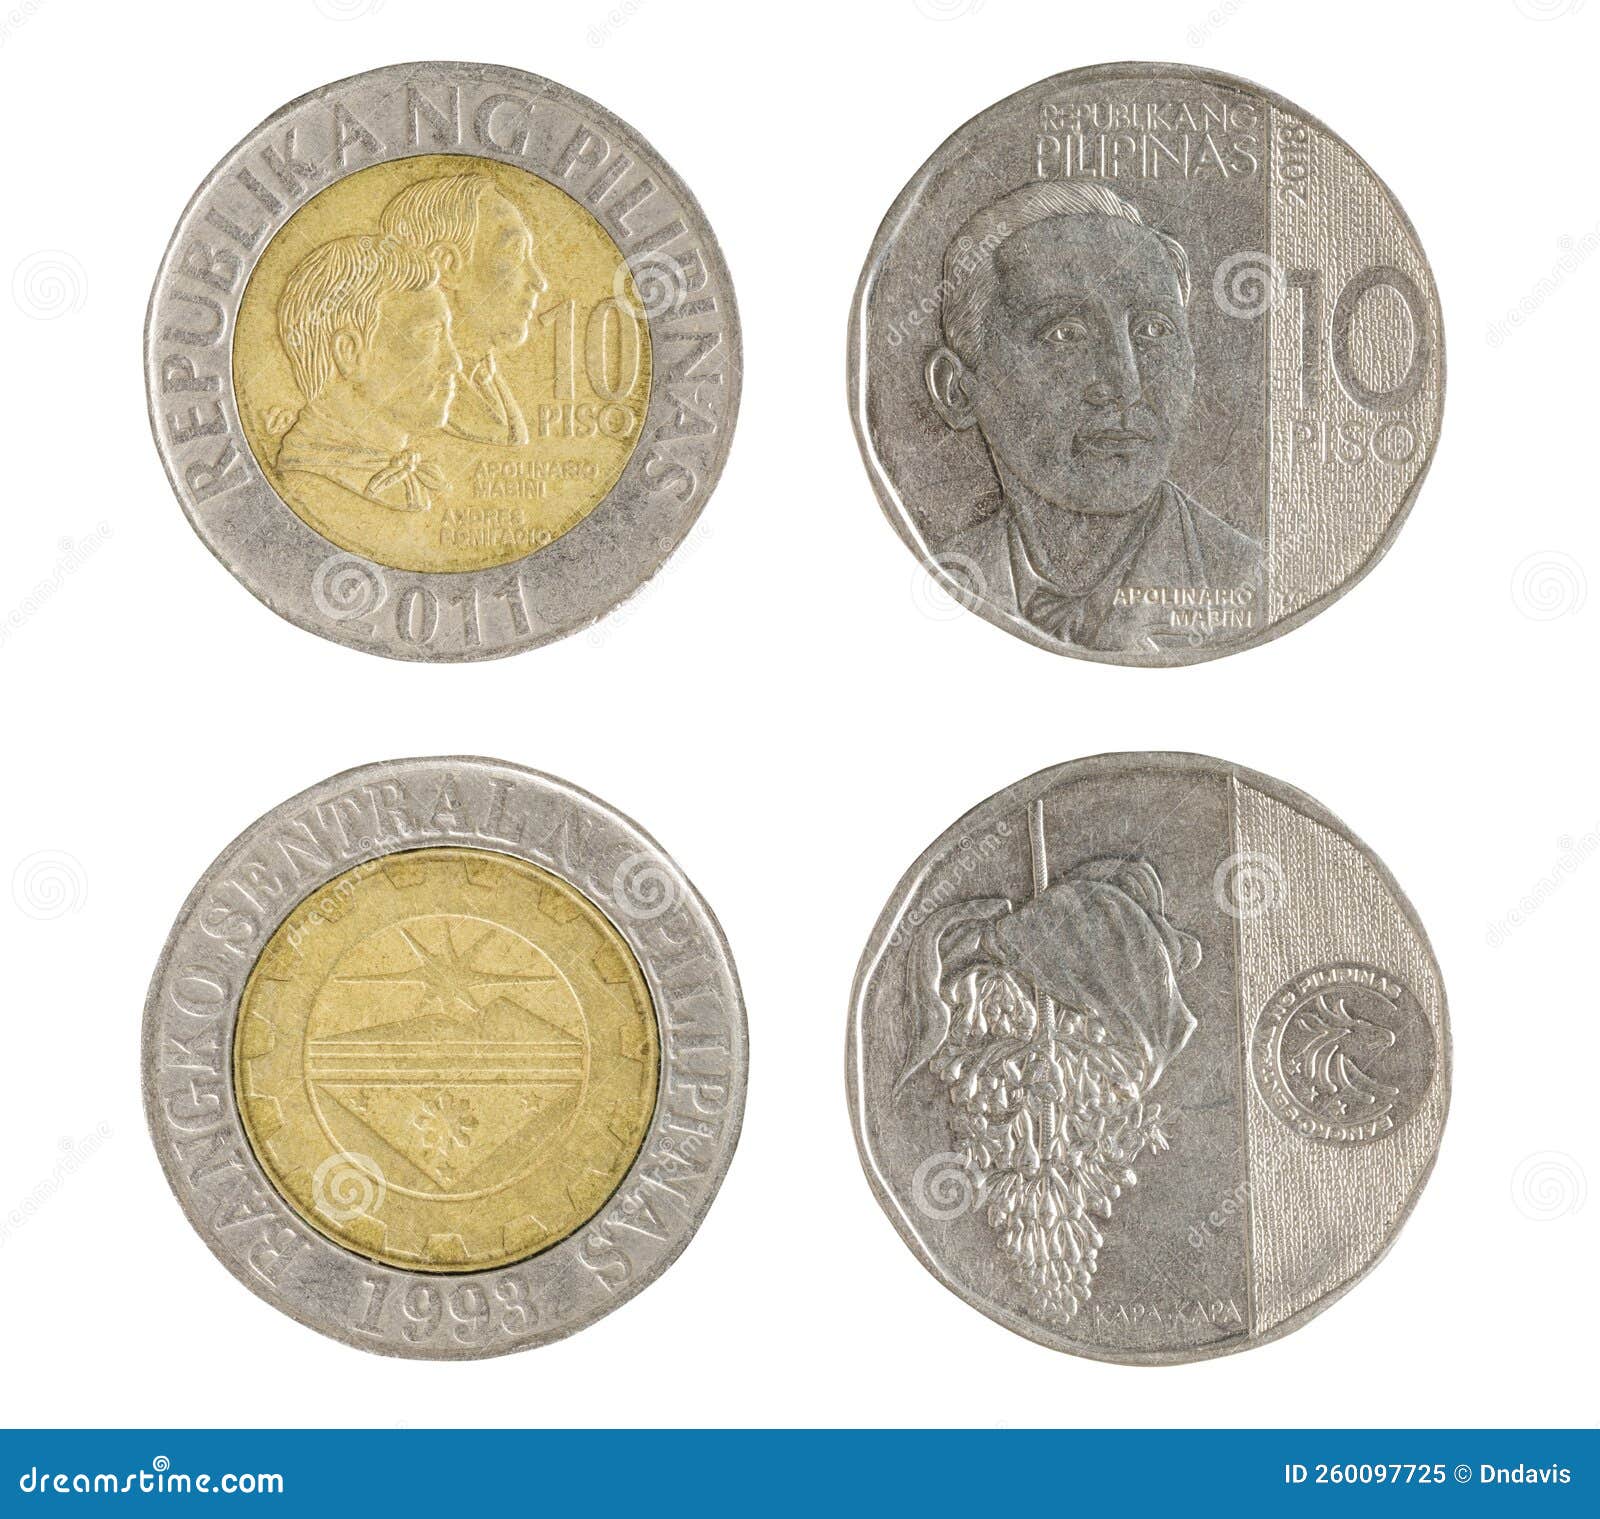 close-up of both old and new 10 piso philippines coin